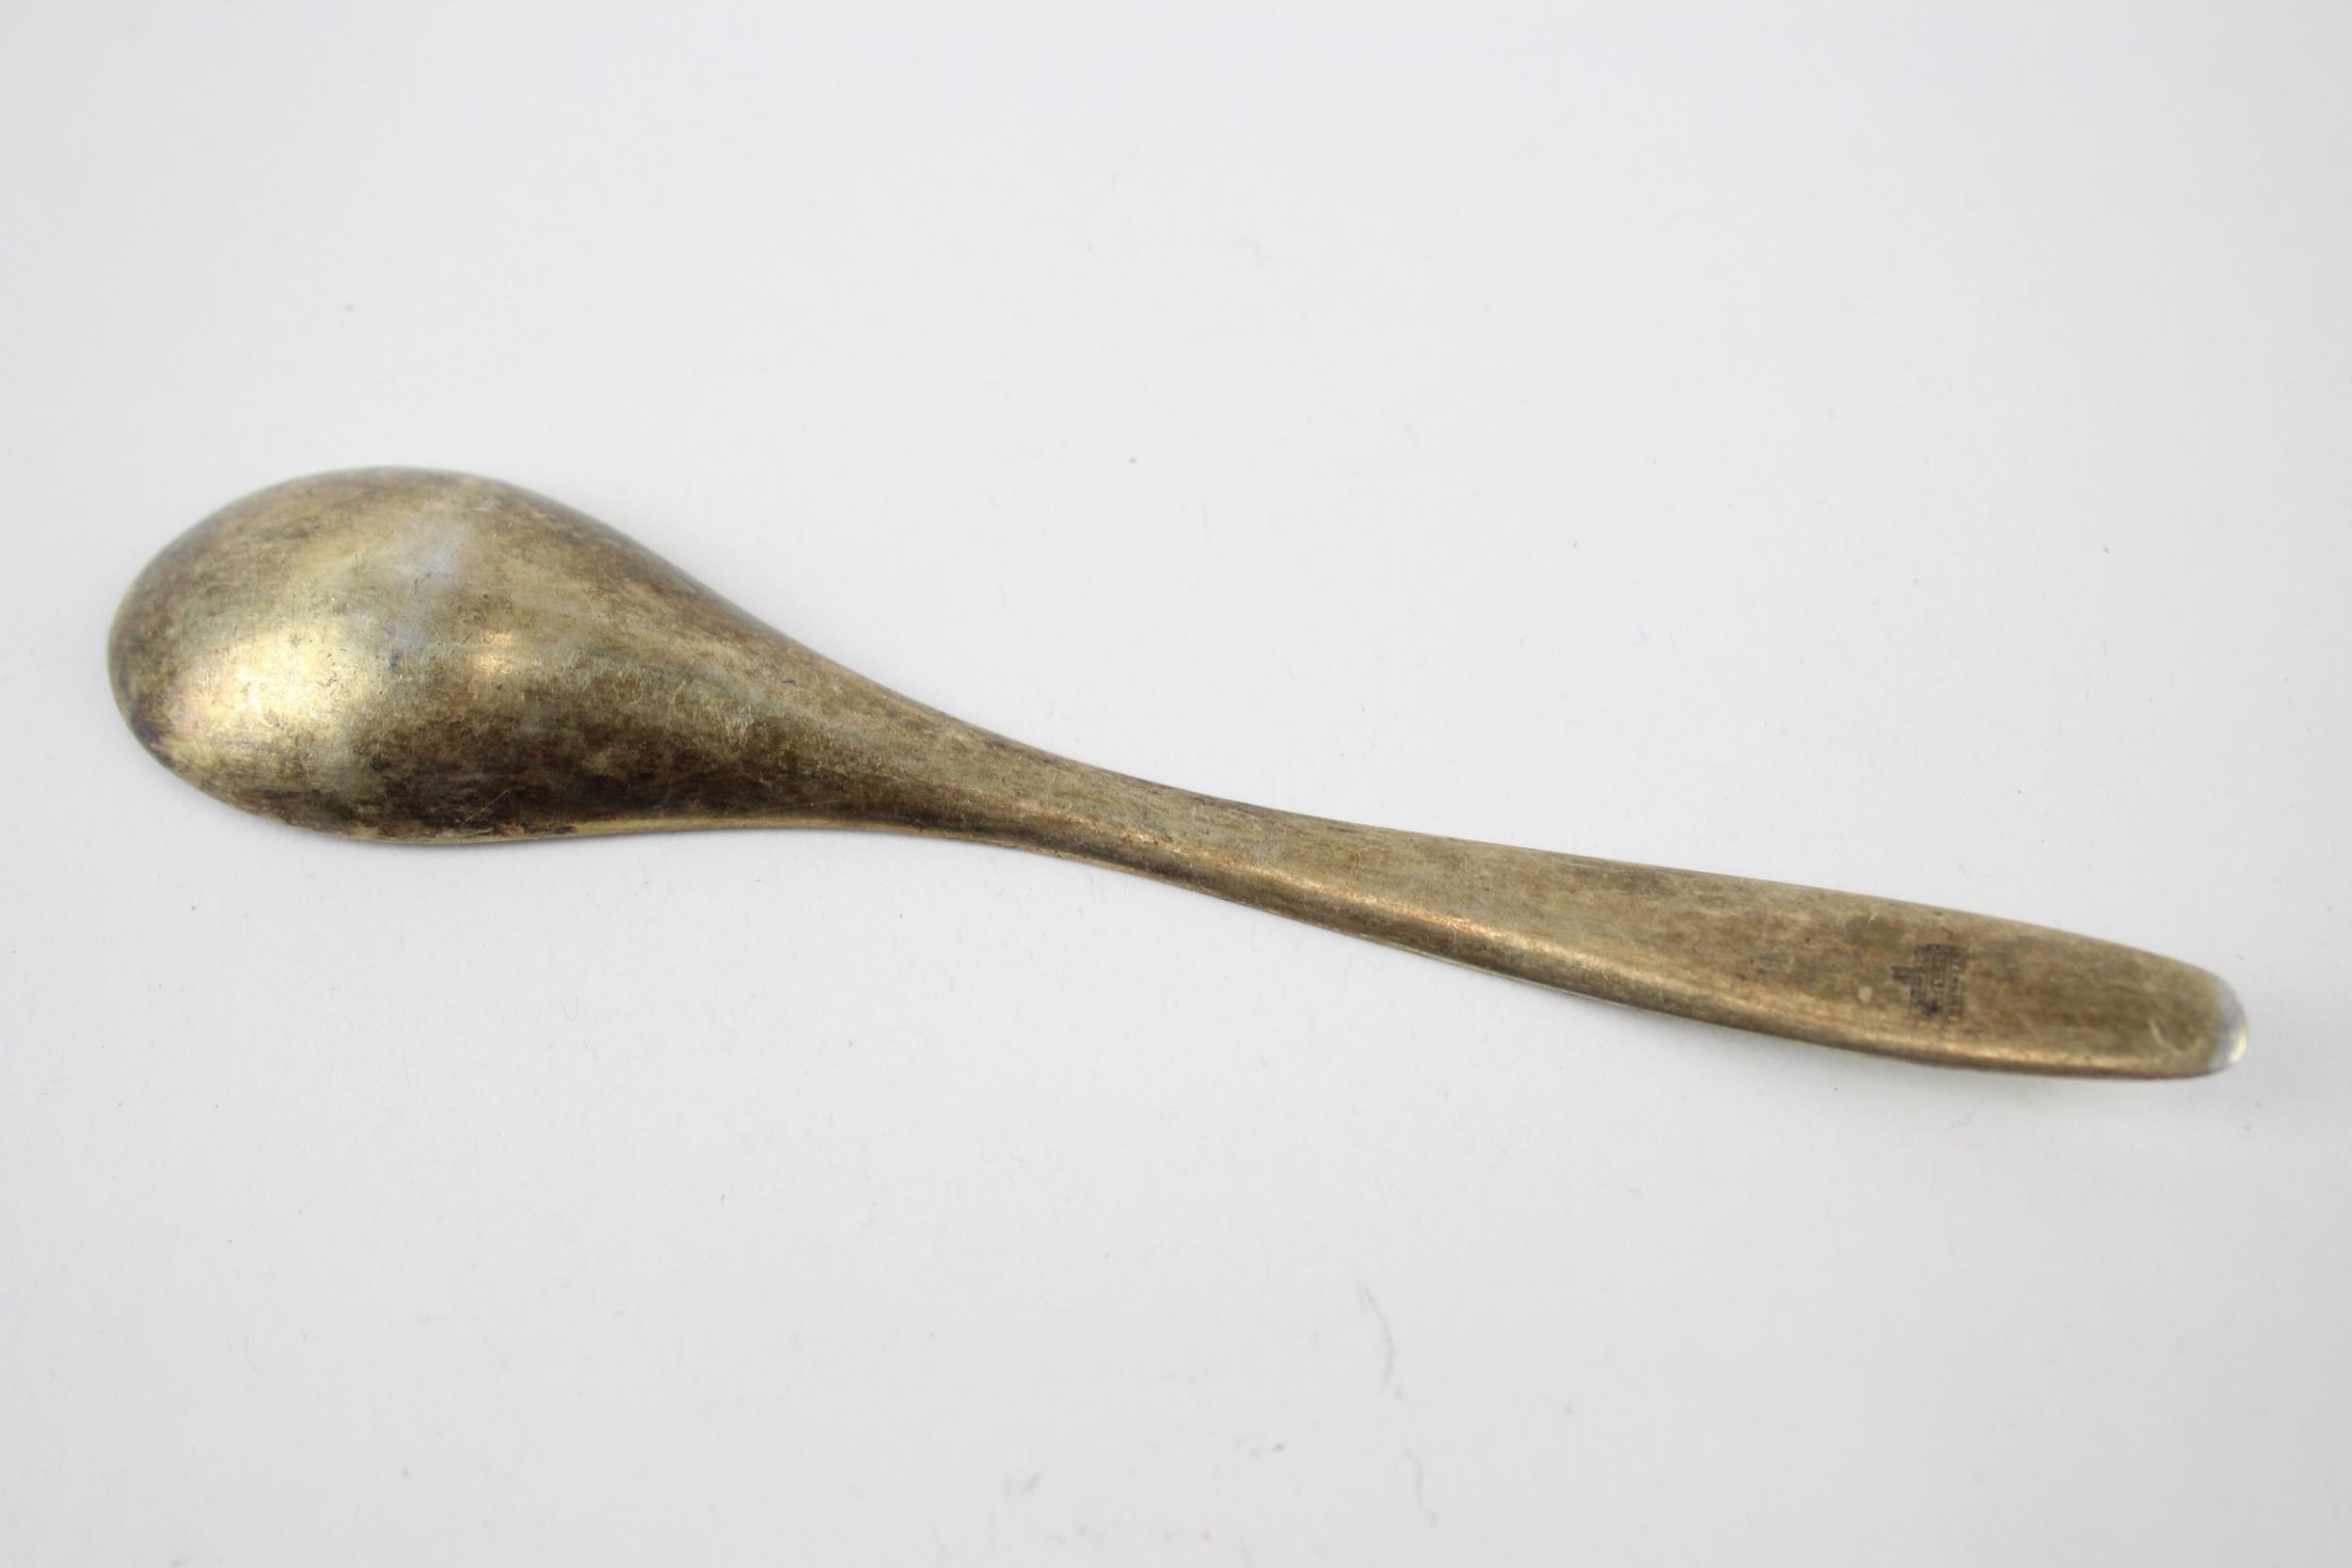 2 x Vintage Stamped .925 Sterling Silver White Guilloche Enamel Spoon & Salt 53g - Inc Norway - Image 4 of 7